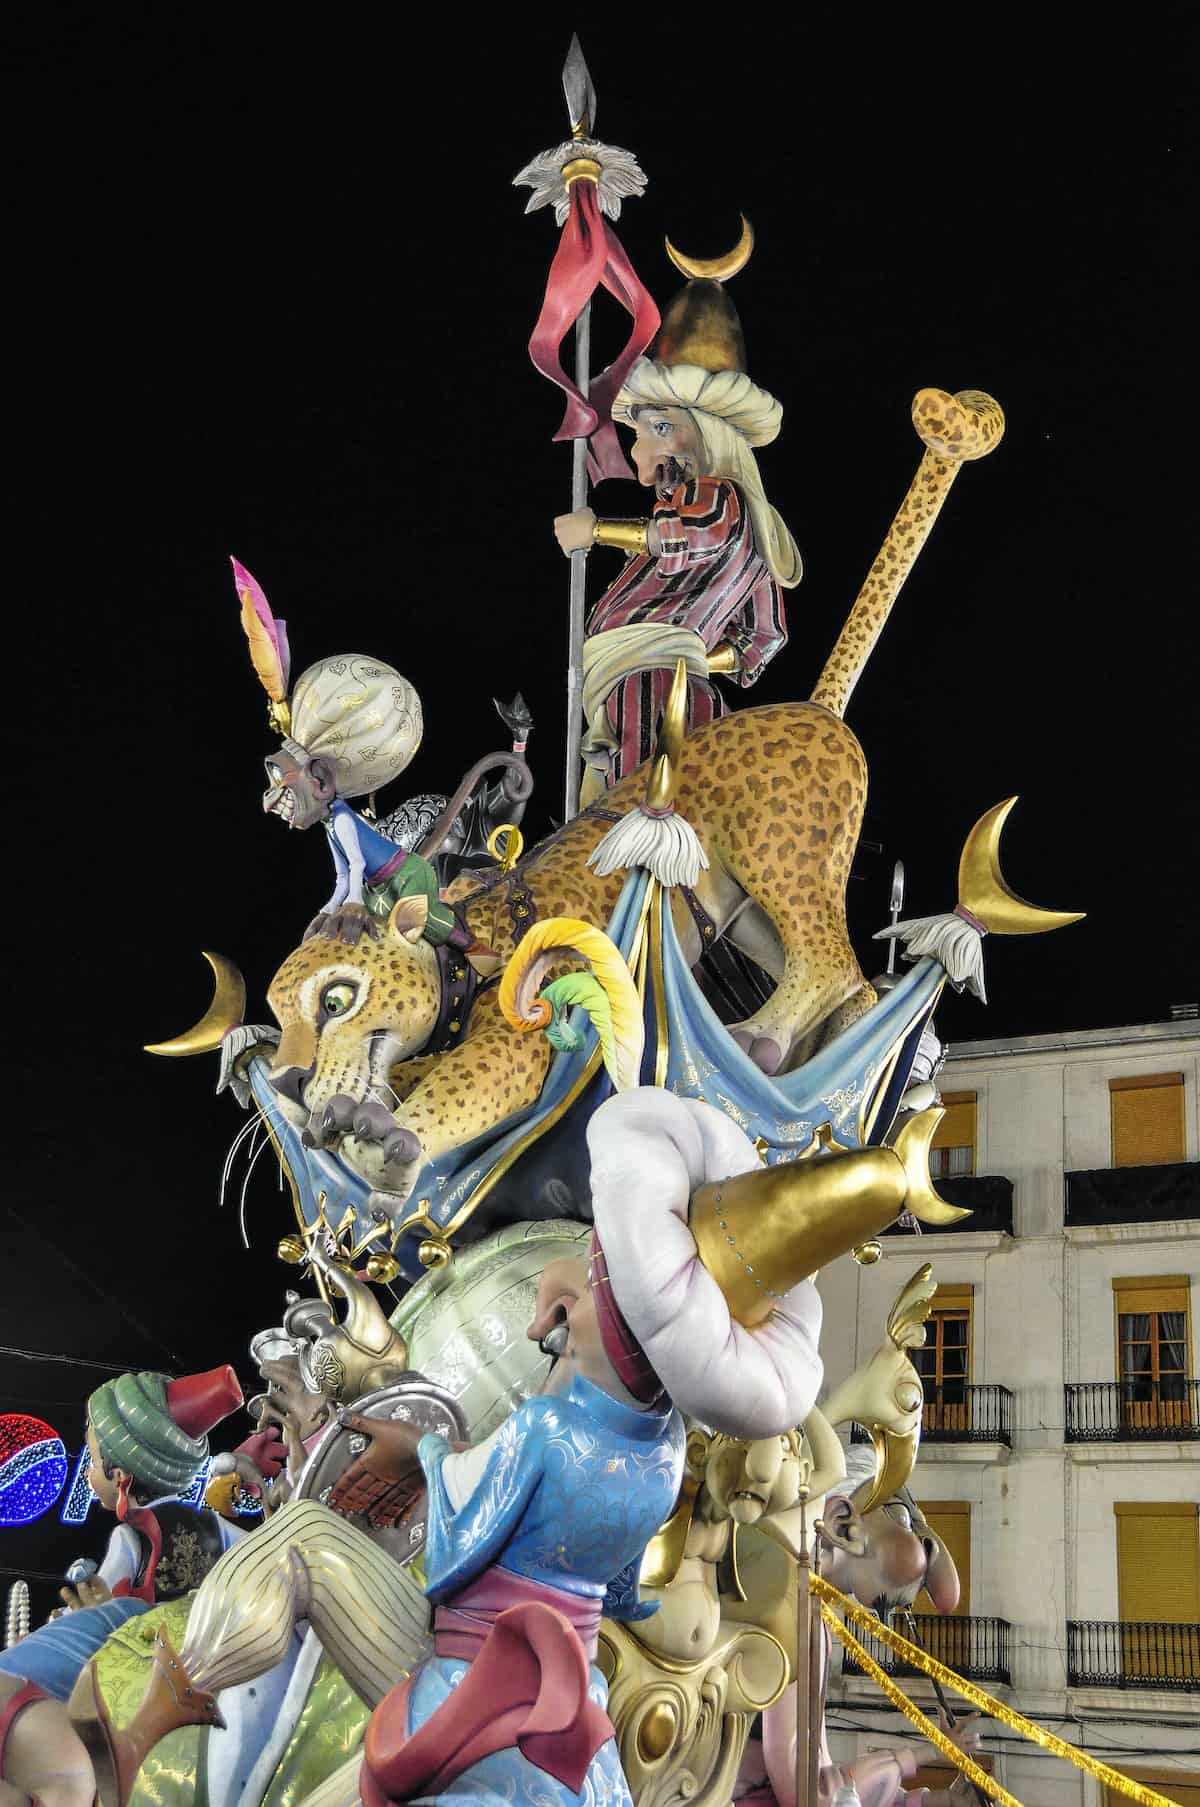 A giant paper sculpture of a leopard and colorful fantasy characters against the night sky.